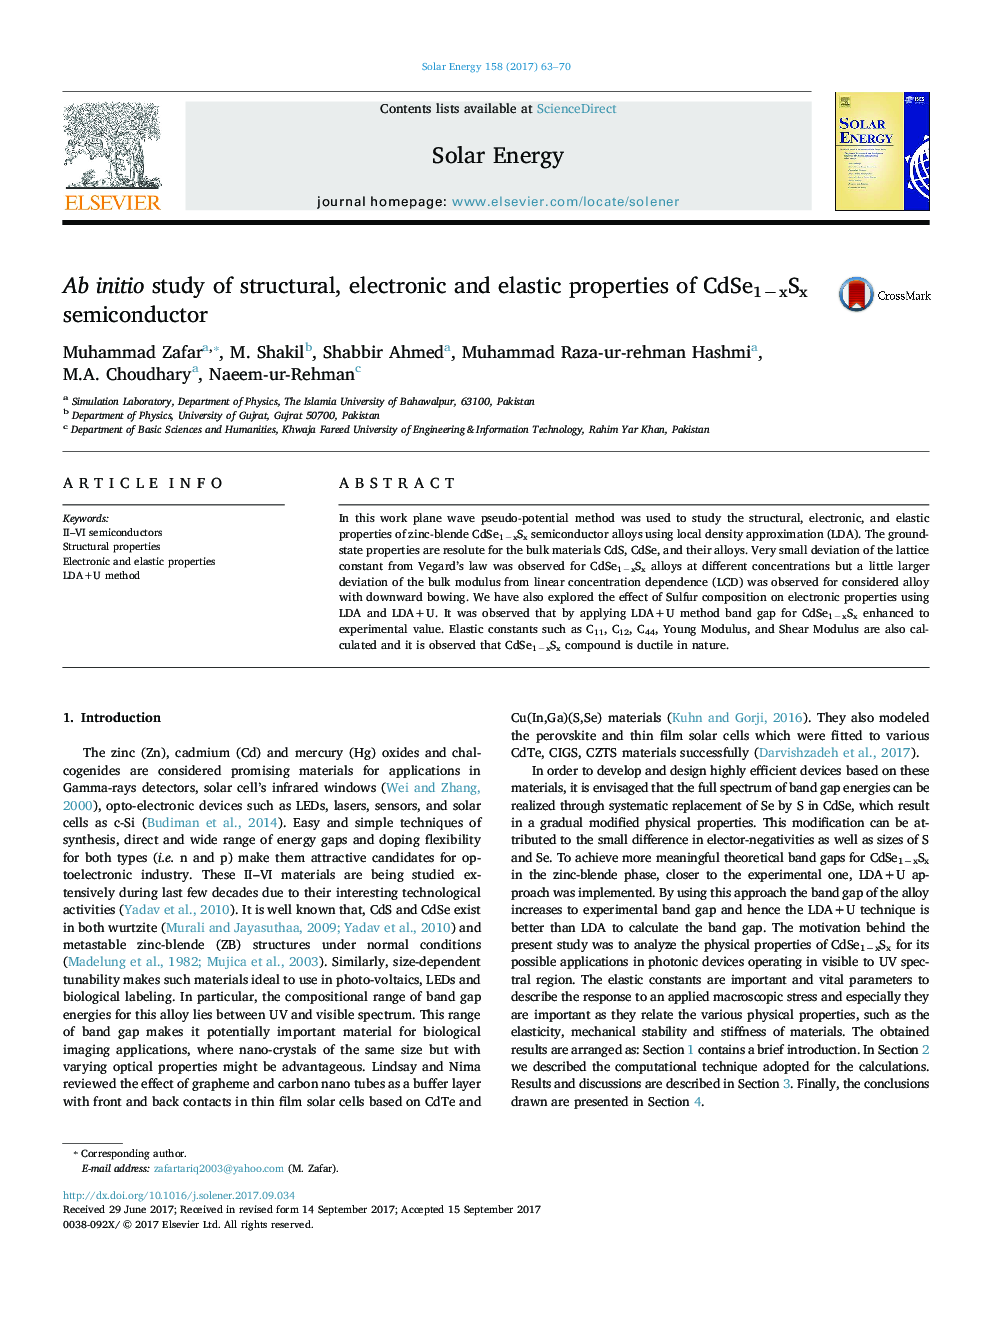 Ab initio study of structural, electronic and elastic properties of CdSe1âxSx semiconductor